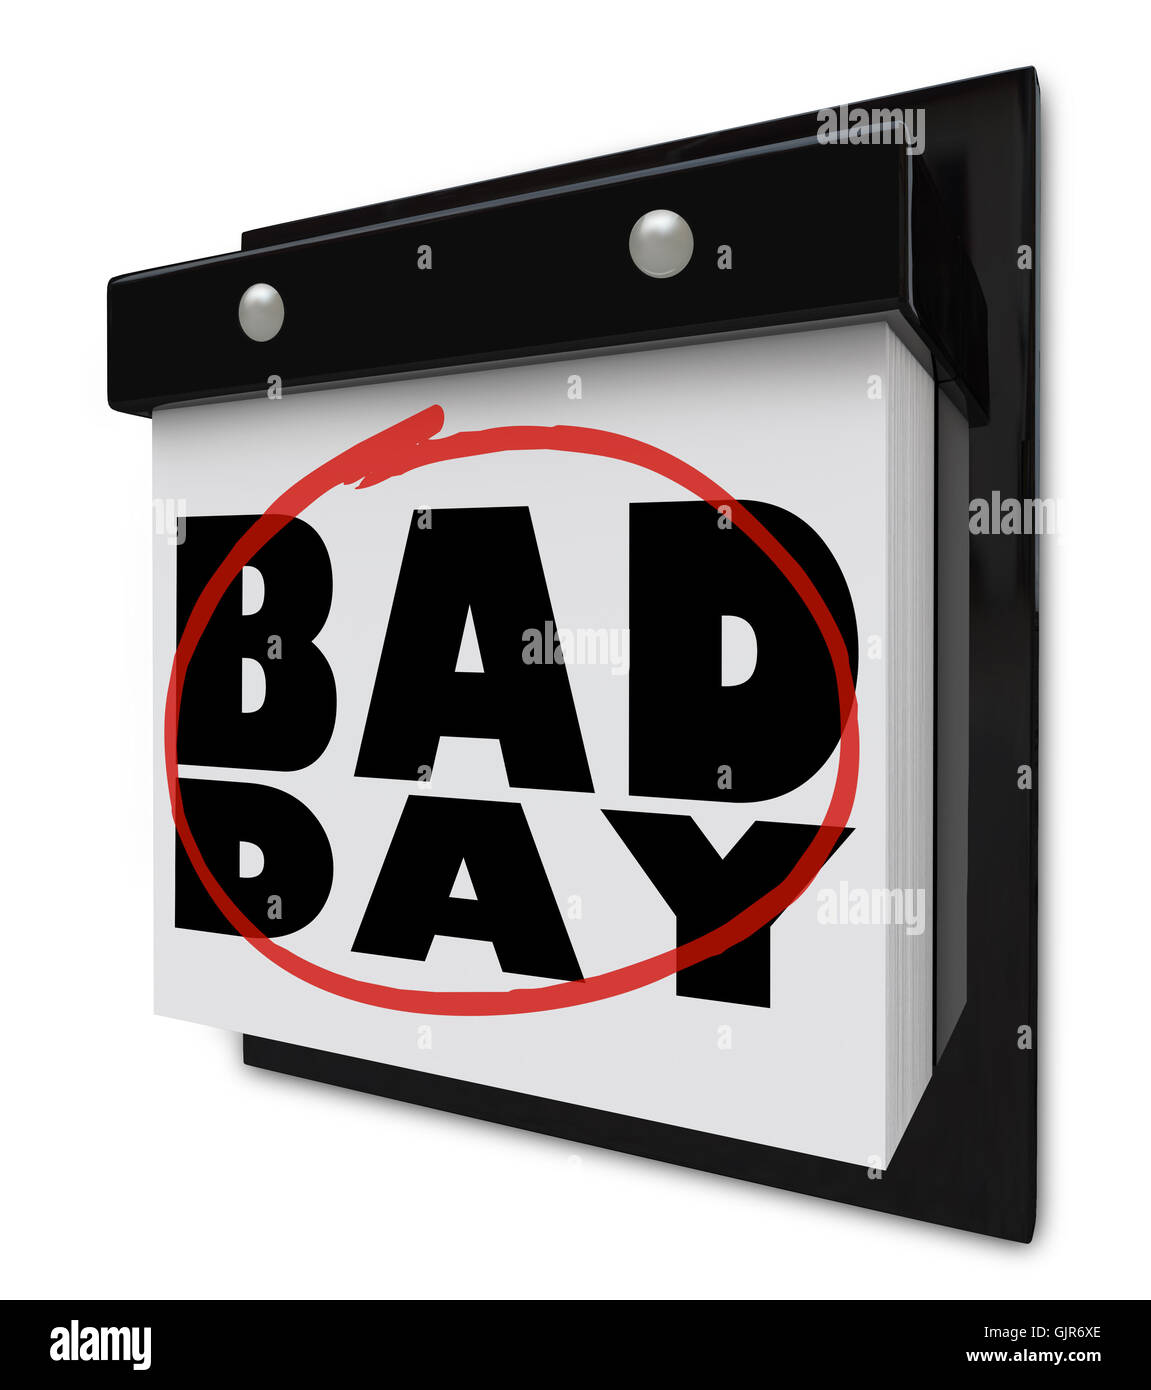 Bad Day - Disappointment and Dread Wall Calendar Stock Photo